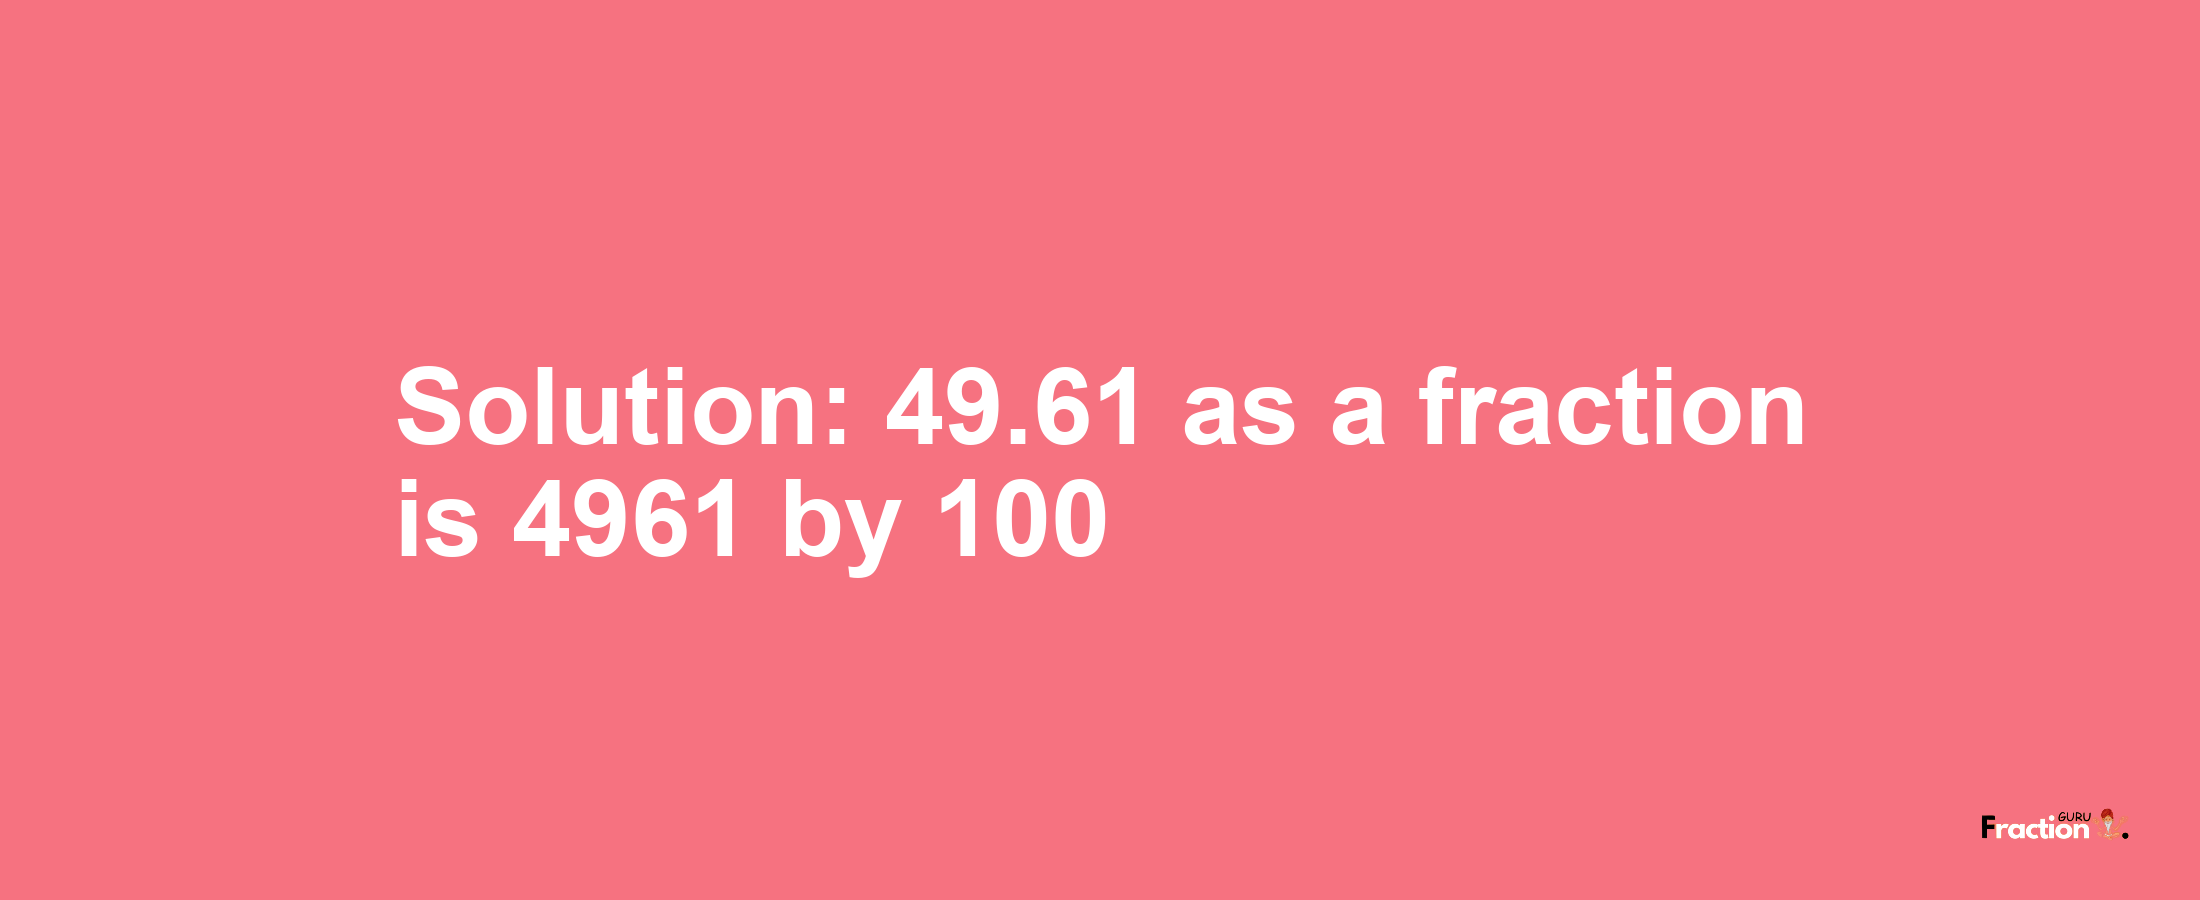 Solution:49.61 as a fraction is 4961/100